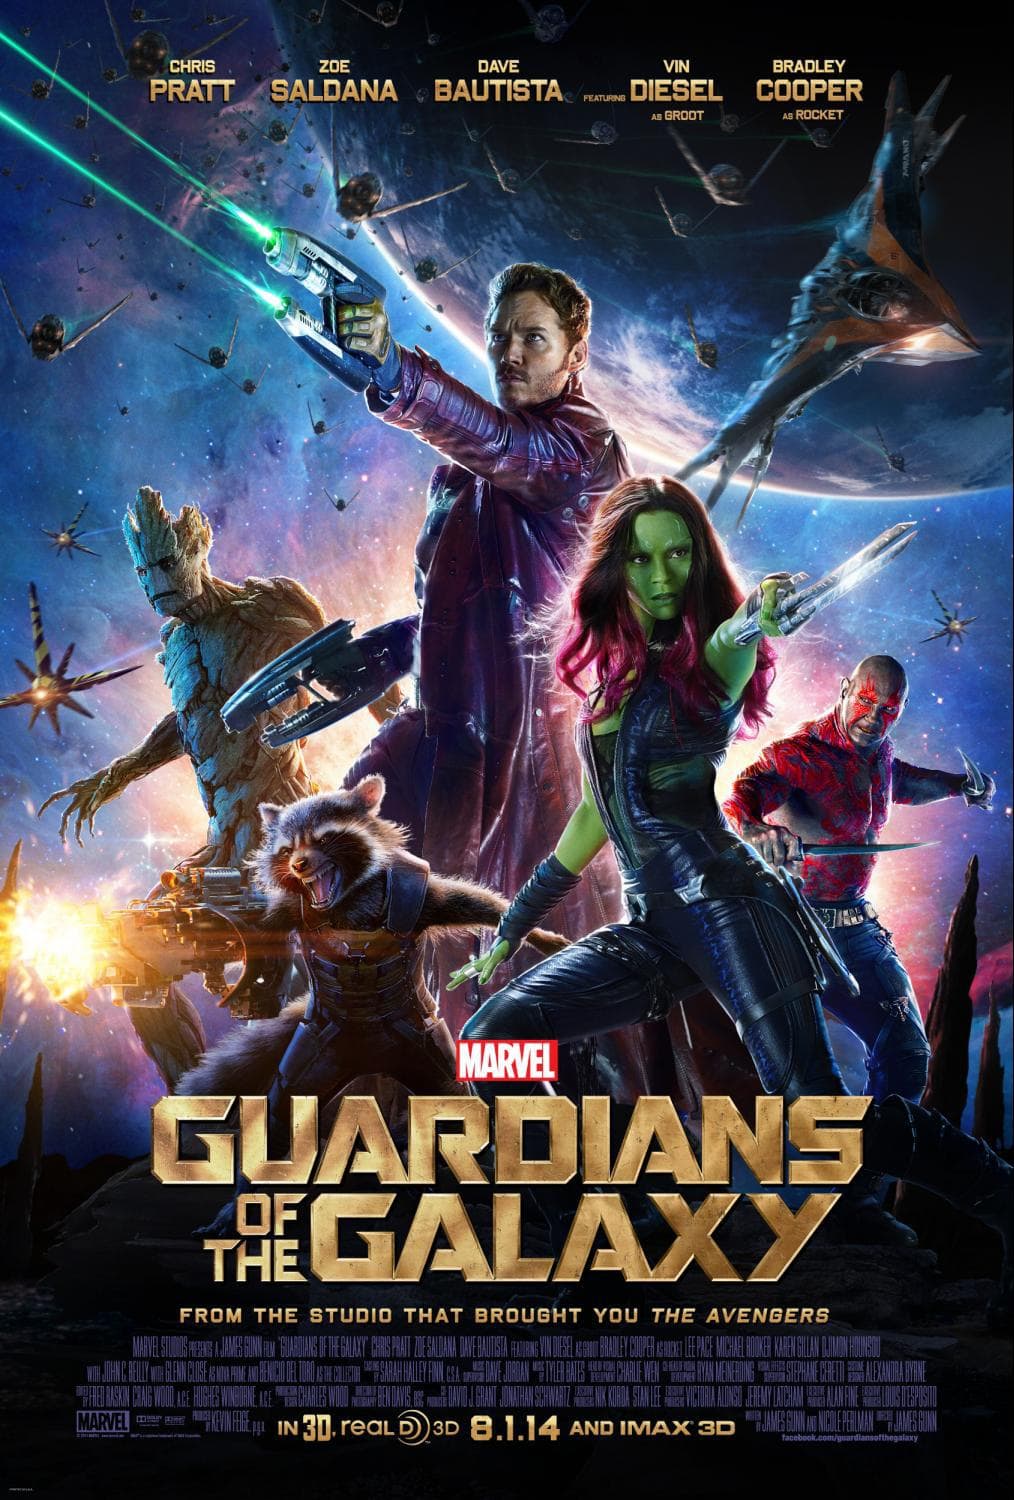 Marvel’s GUARDIANS OF THE GALAXY New Poster and Exclusive Trailer Launch